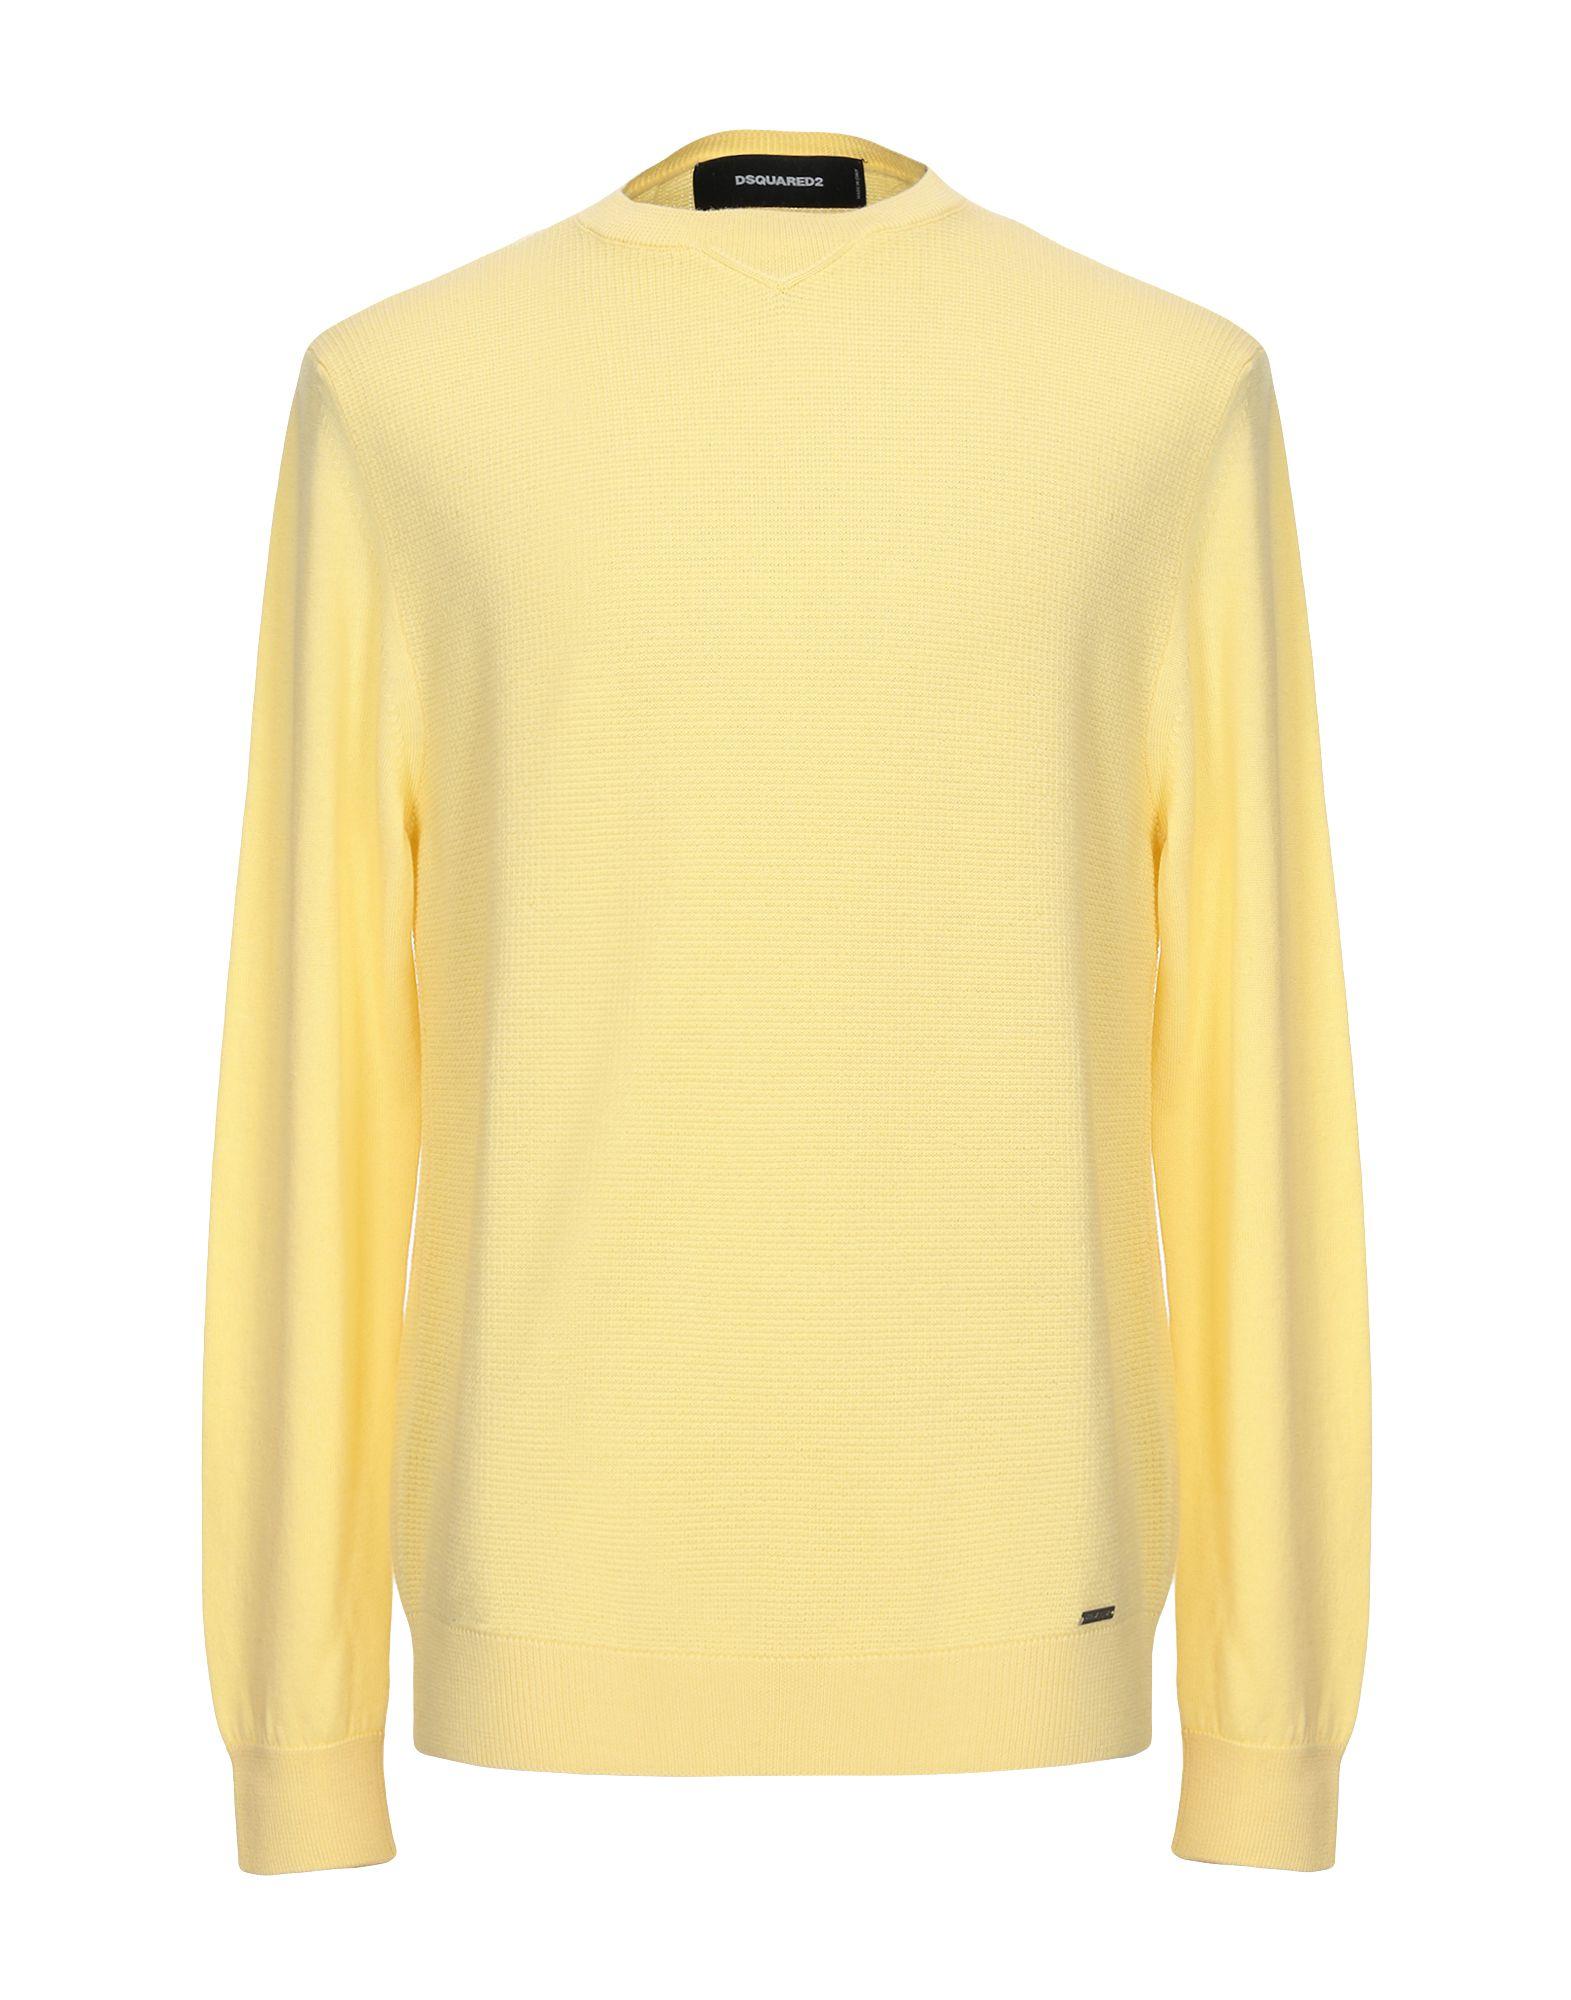 DSquared² Wool Jumper in Light Yellow (Yellow) for Men - Lyst